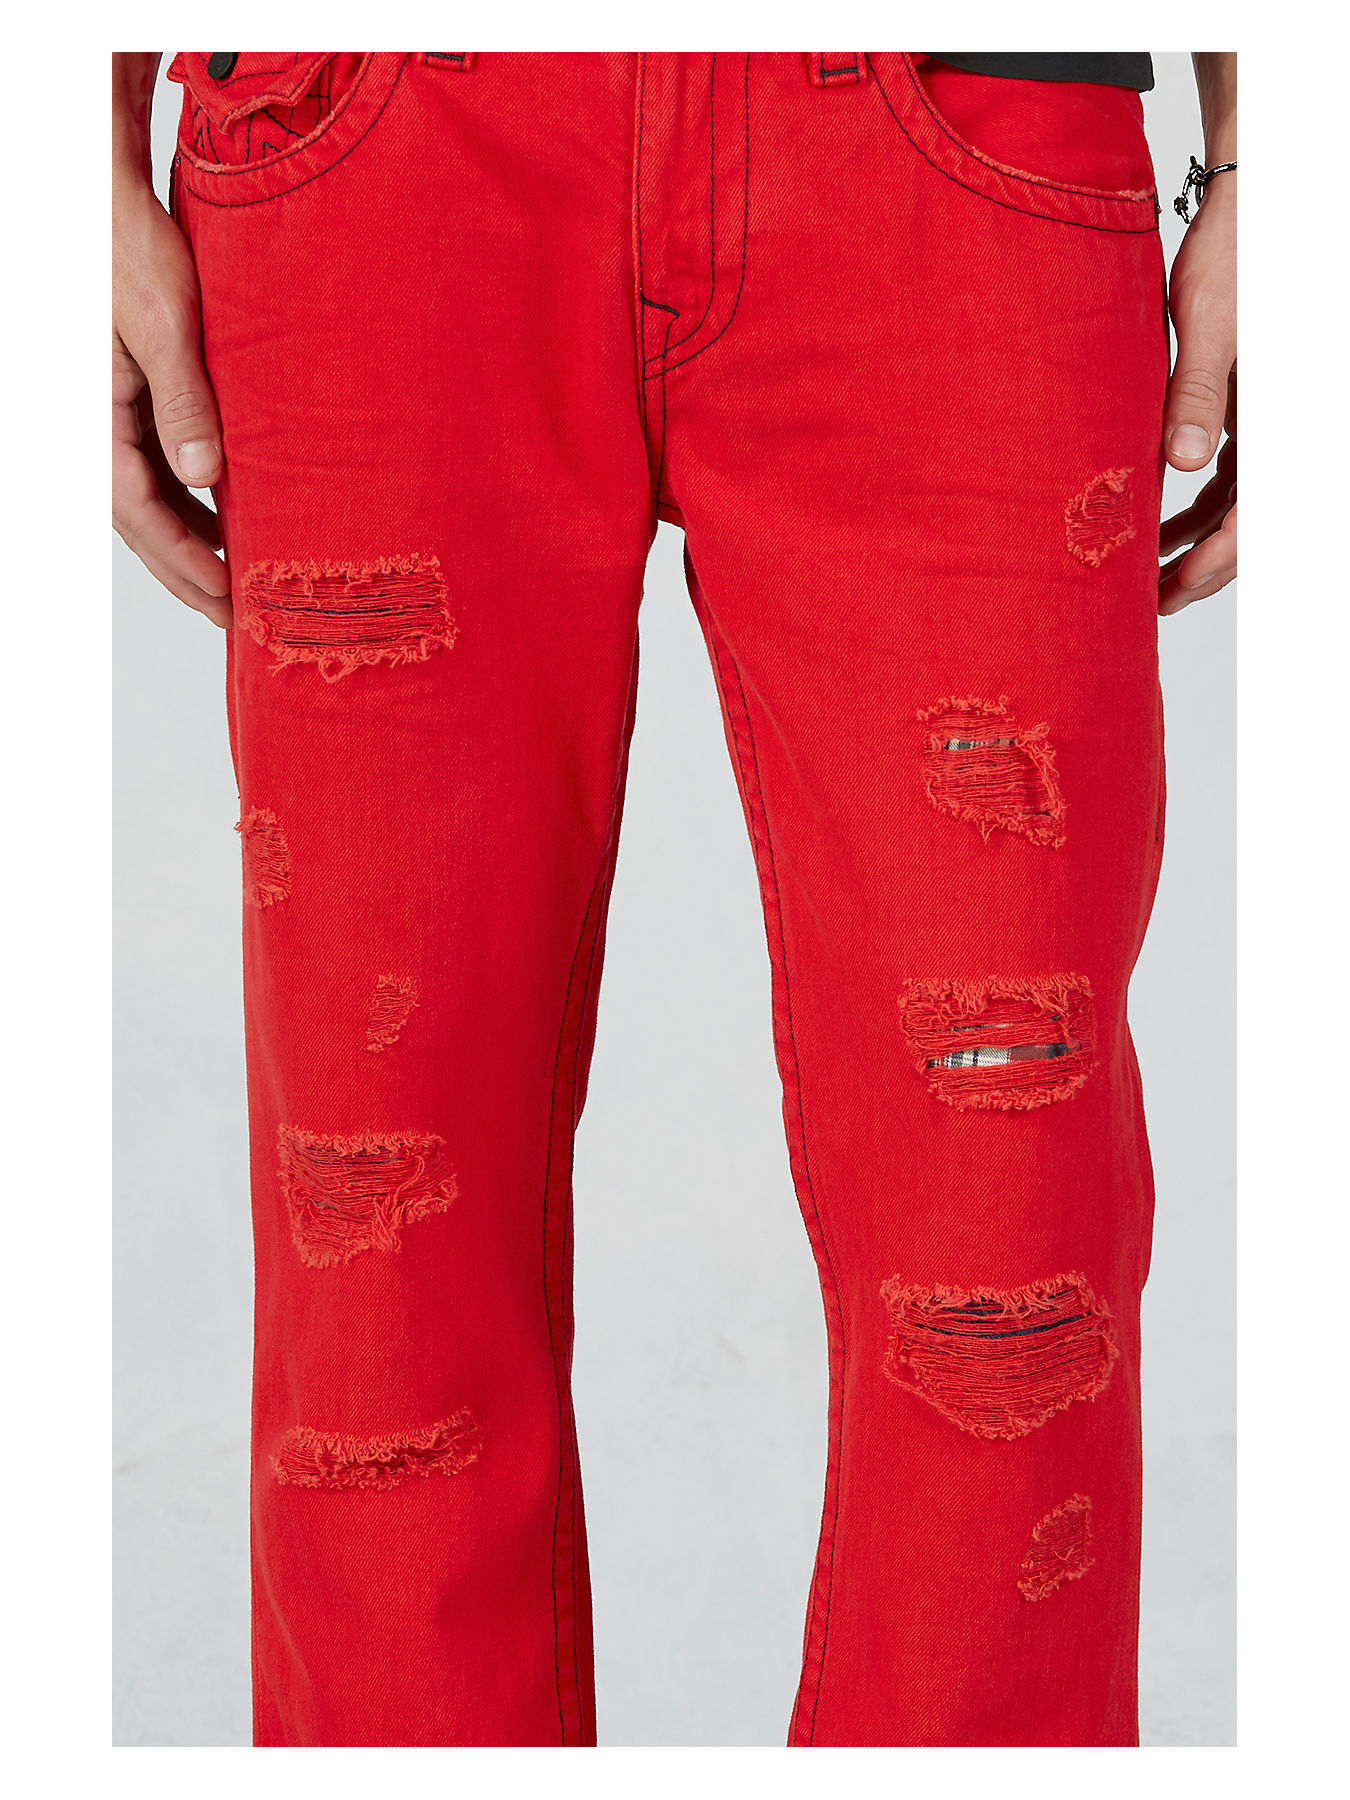 HAND PICKED STRAIGHT MENS RED JEANS - True Religion